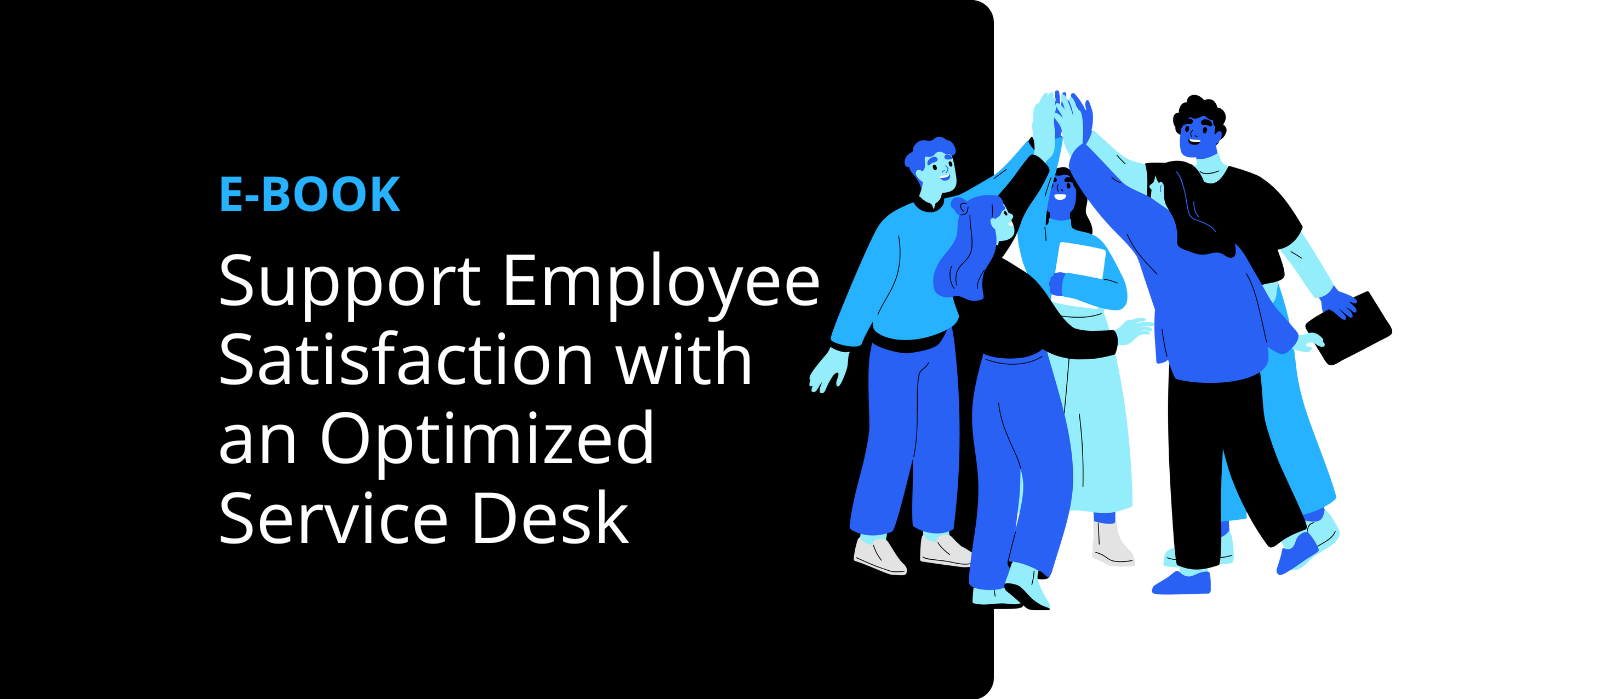 Graphic illustration for the e-book "Support Employee Satisfaction with an Optimized Service Desk."